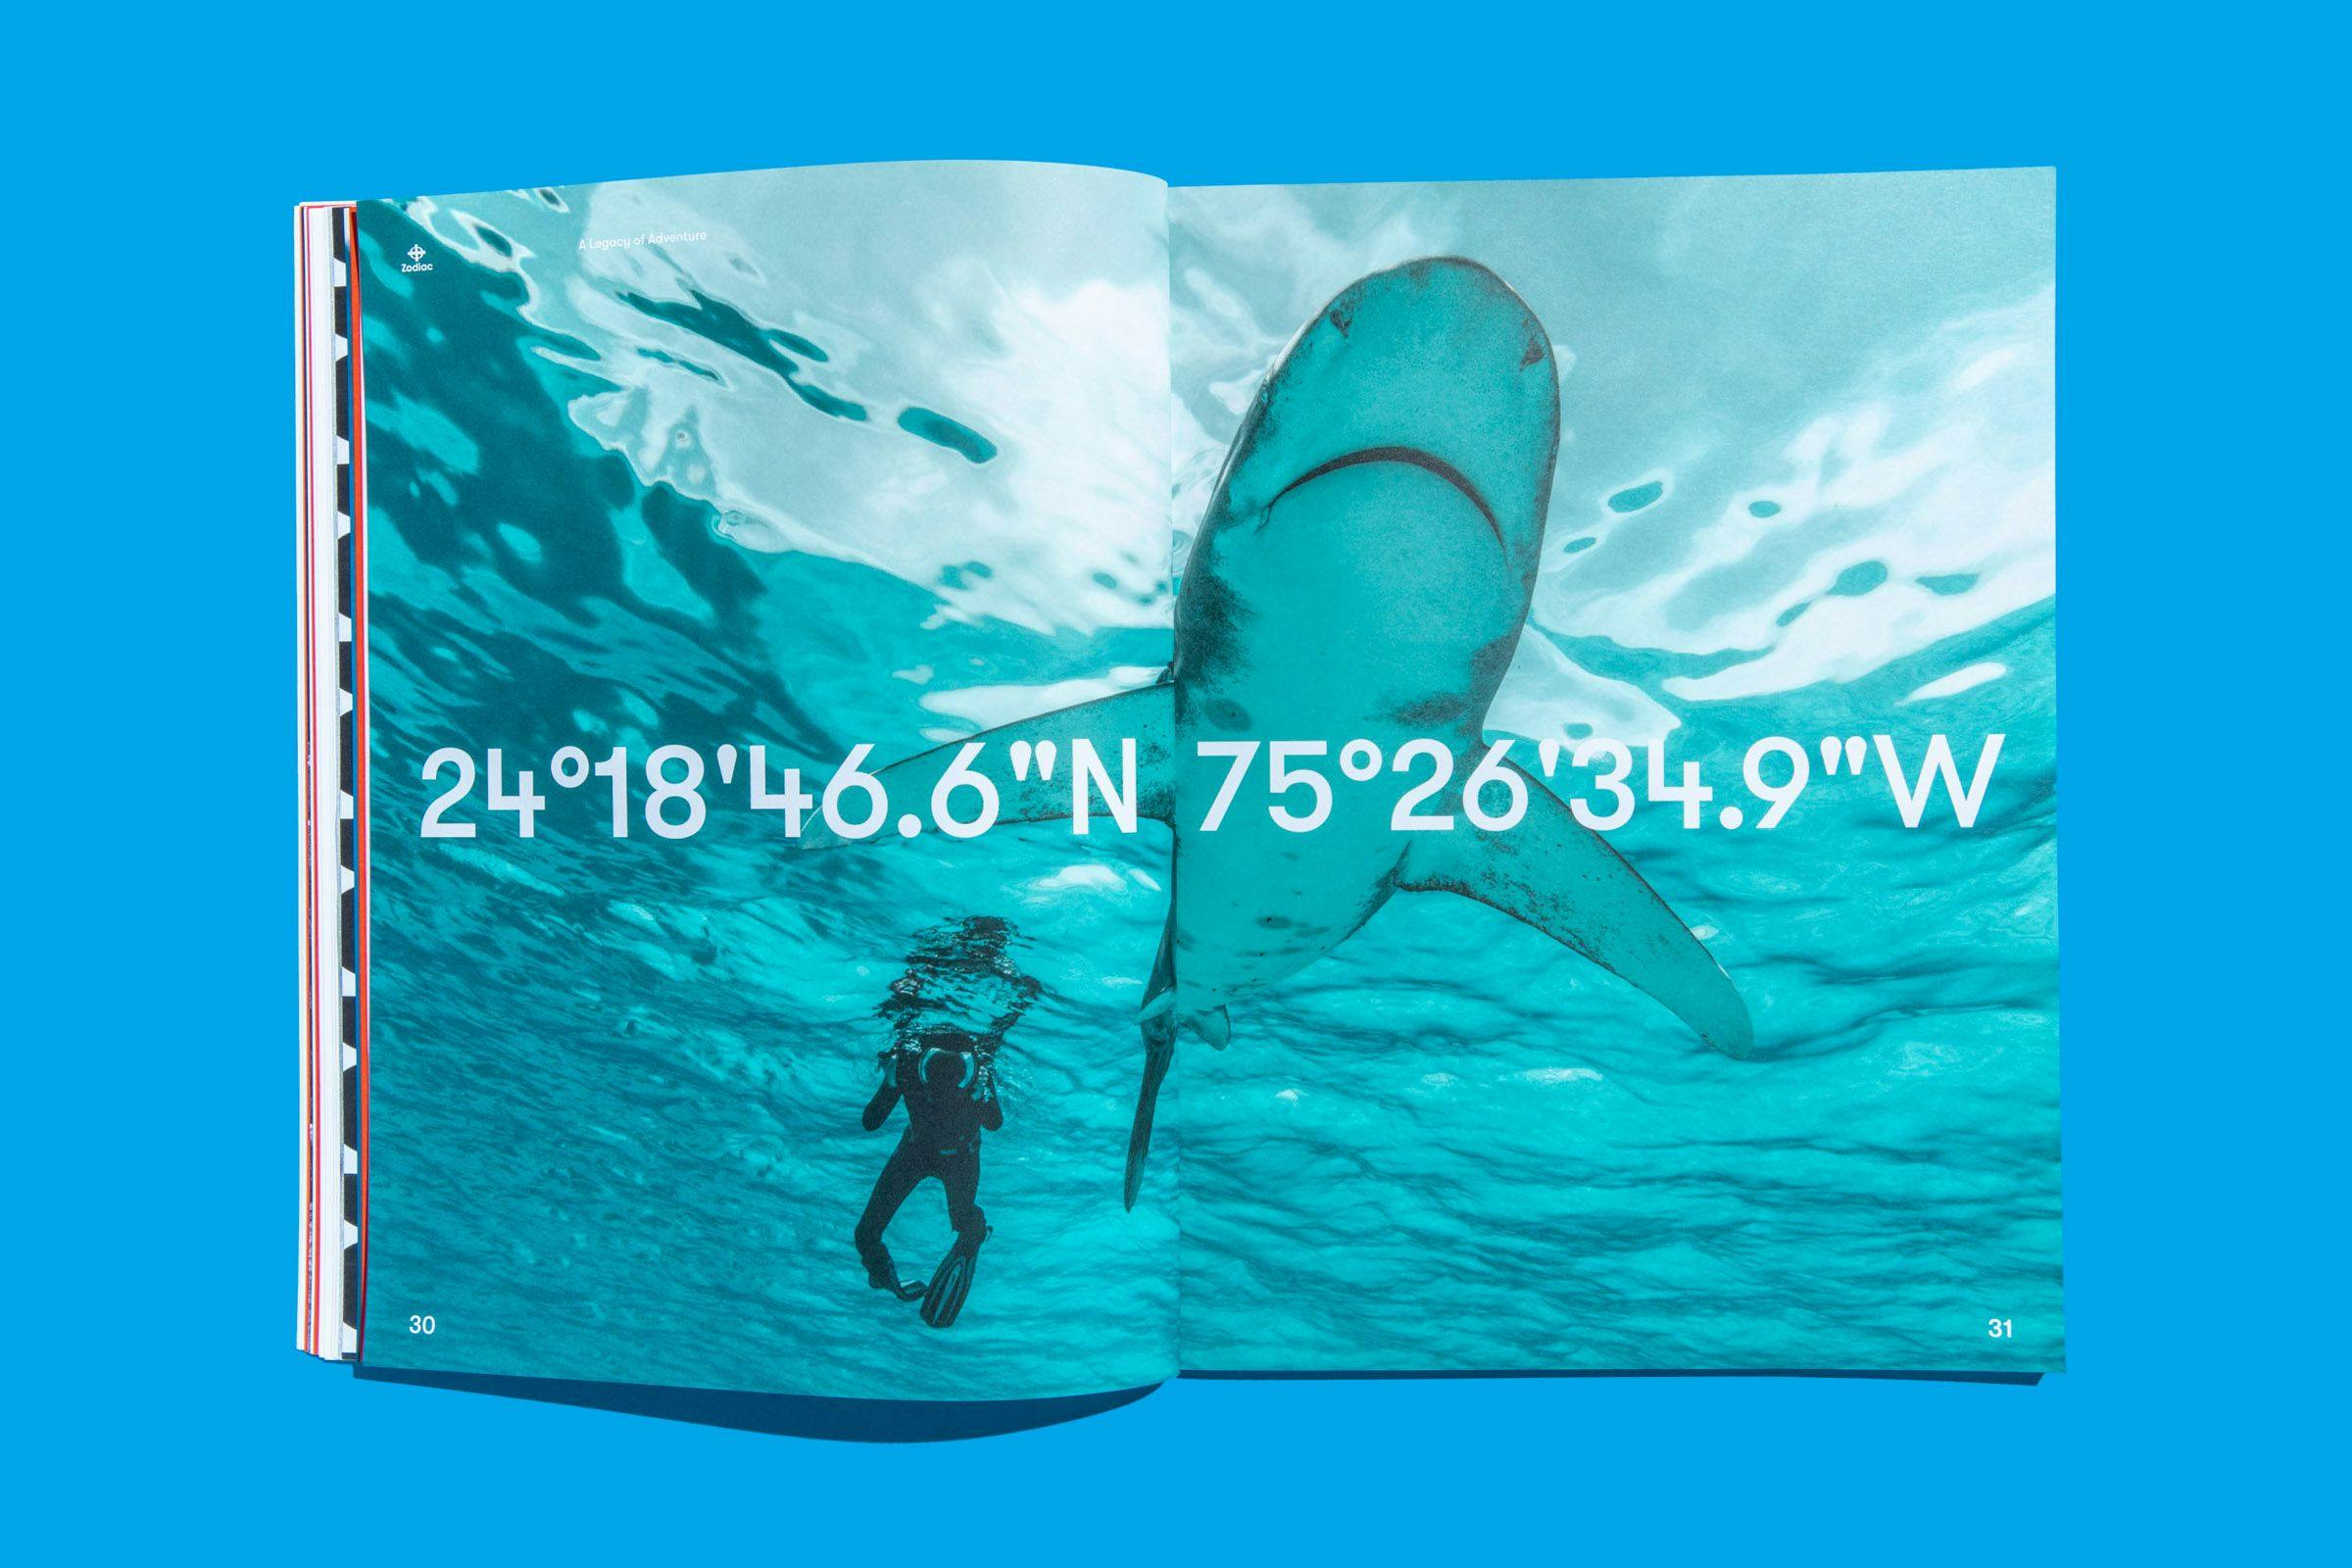 A two-page spread showing a diver swimming with a shark